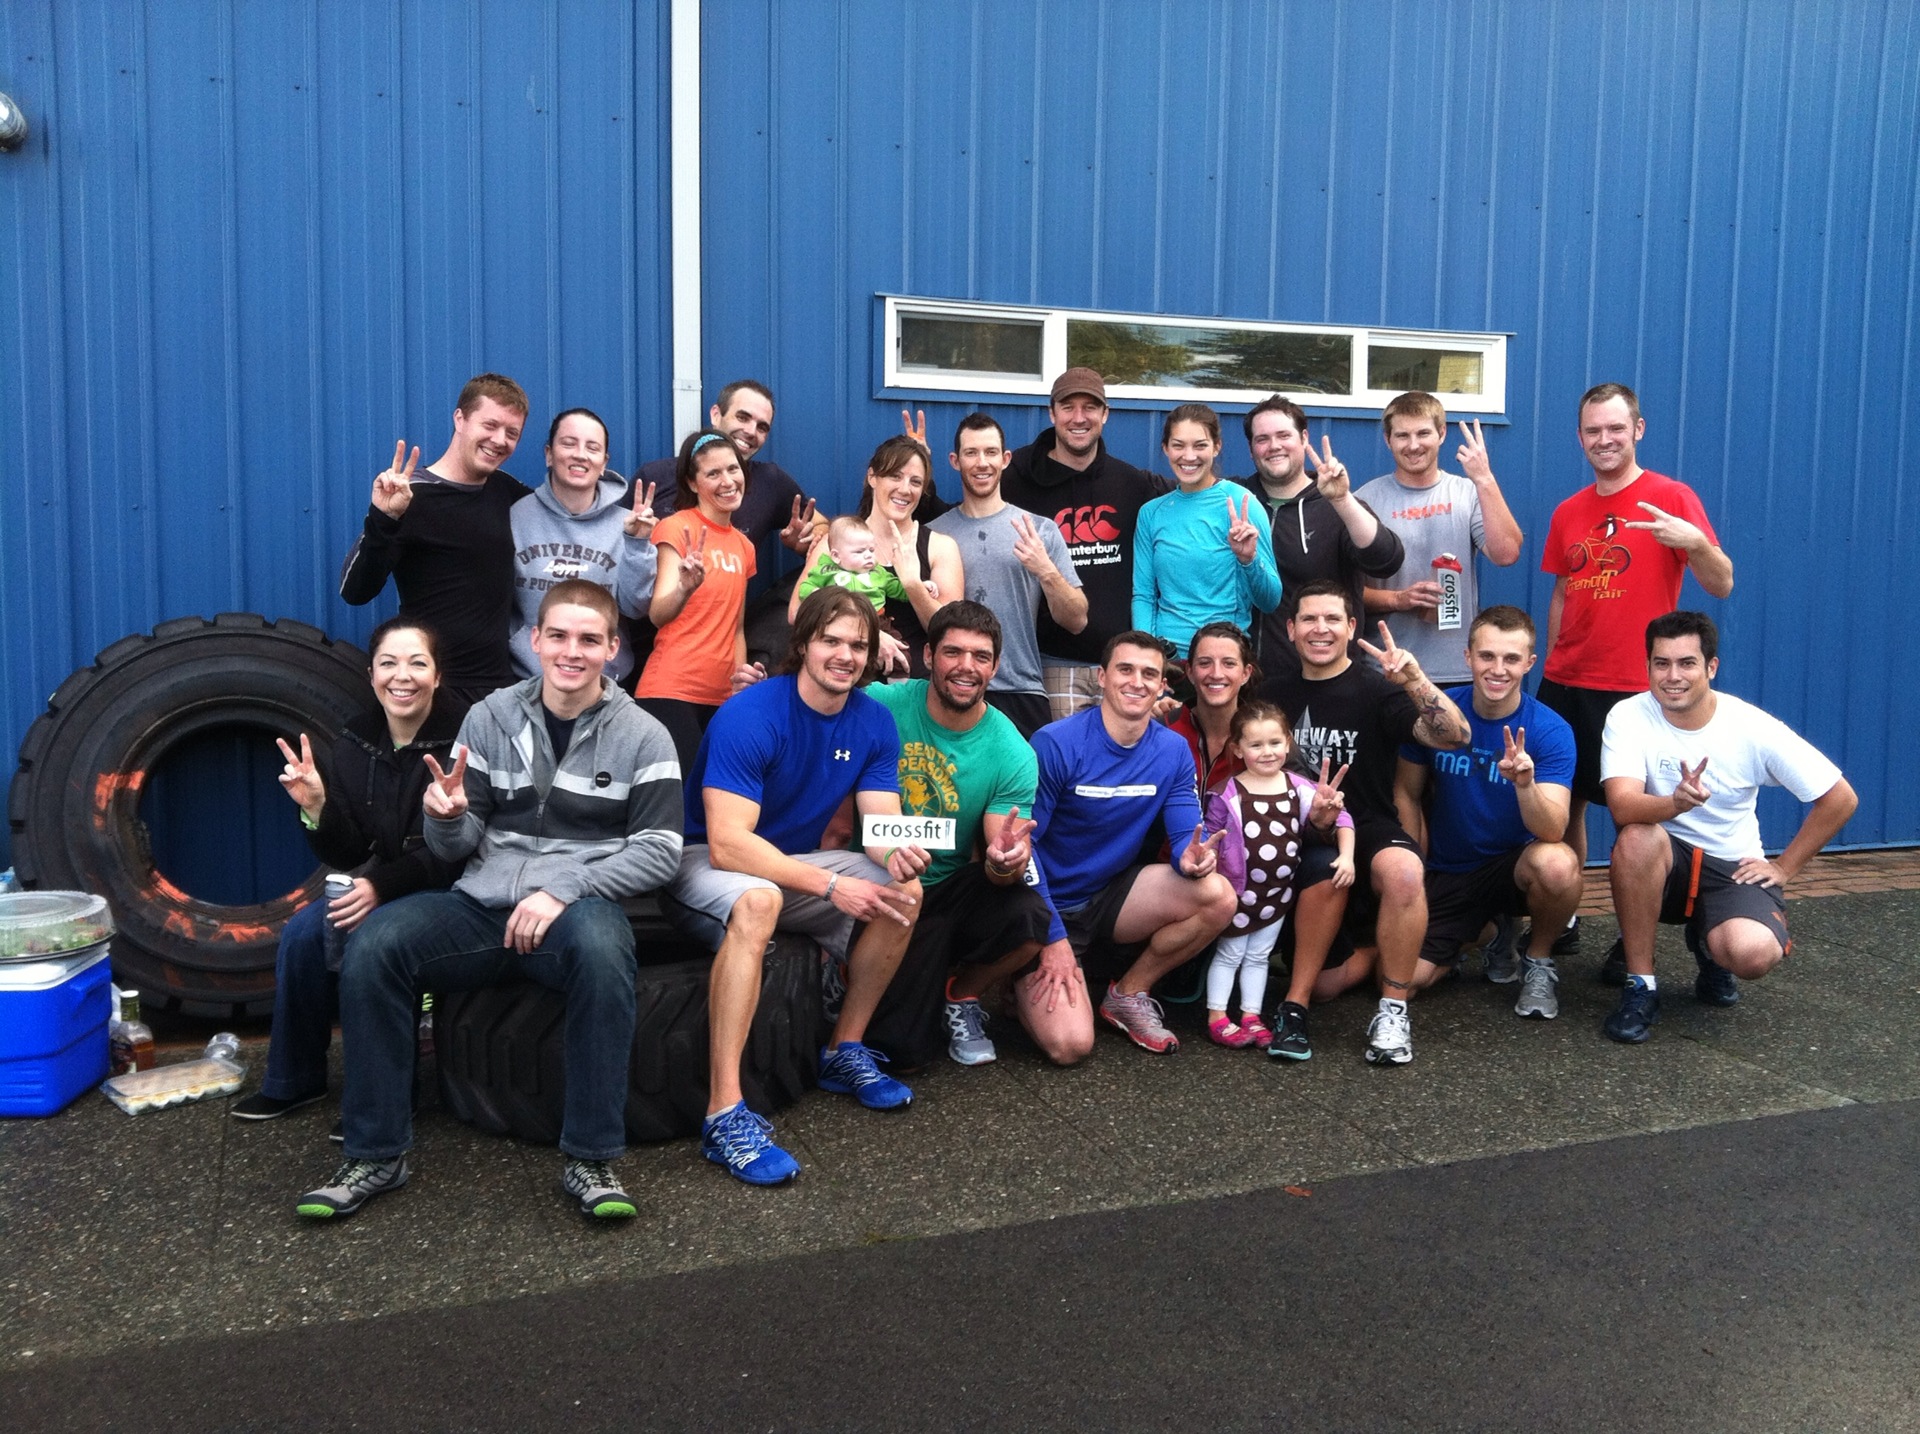 A Day of CrossFit Fun At StoneWay CrossFit!